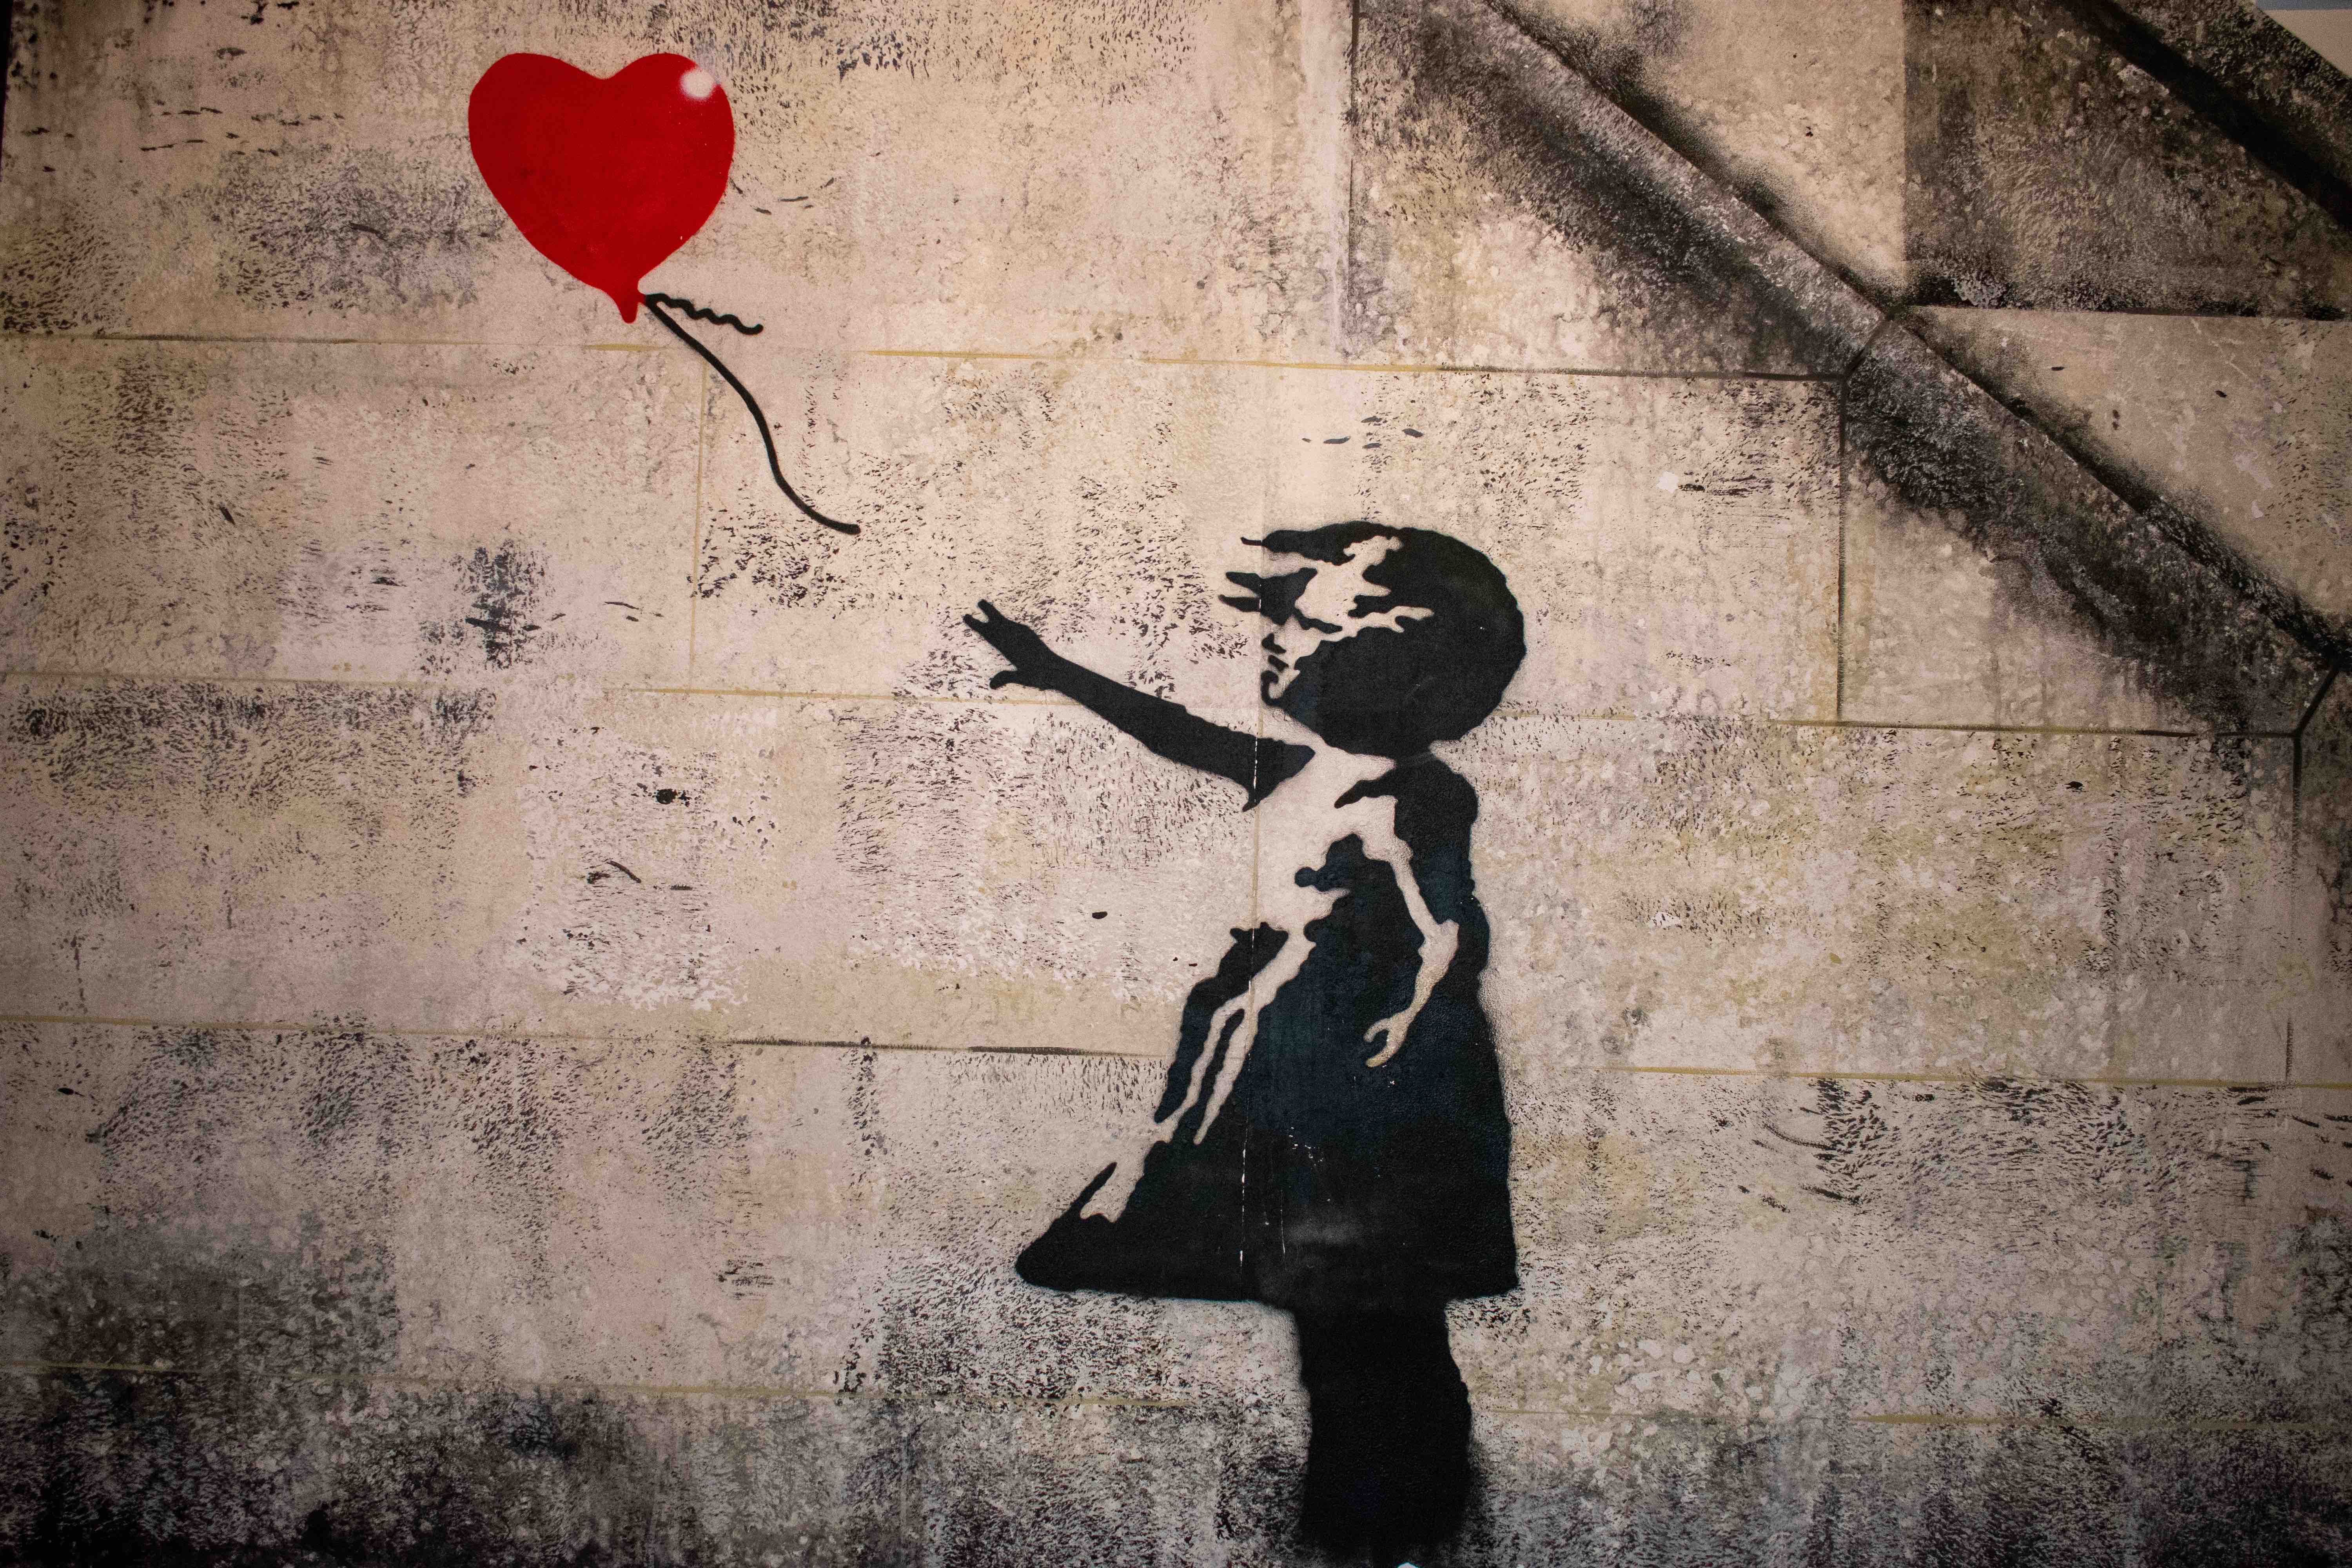 10 Facts You Should Know About Banksy - Artsper Magazine